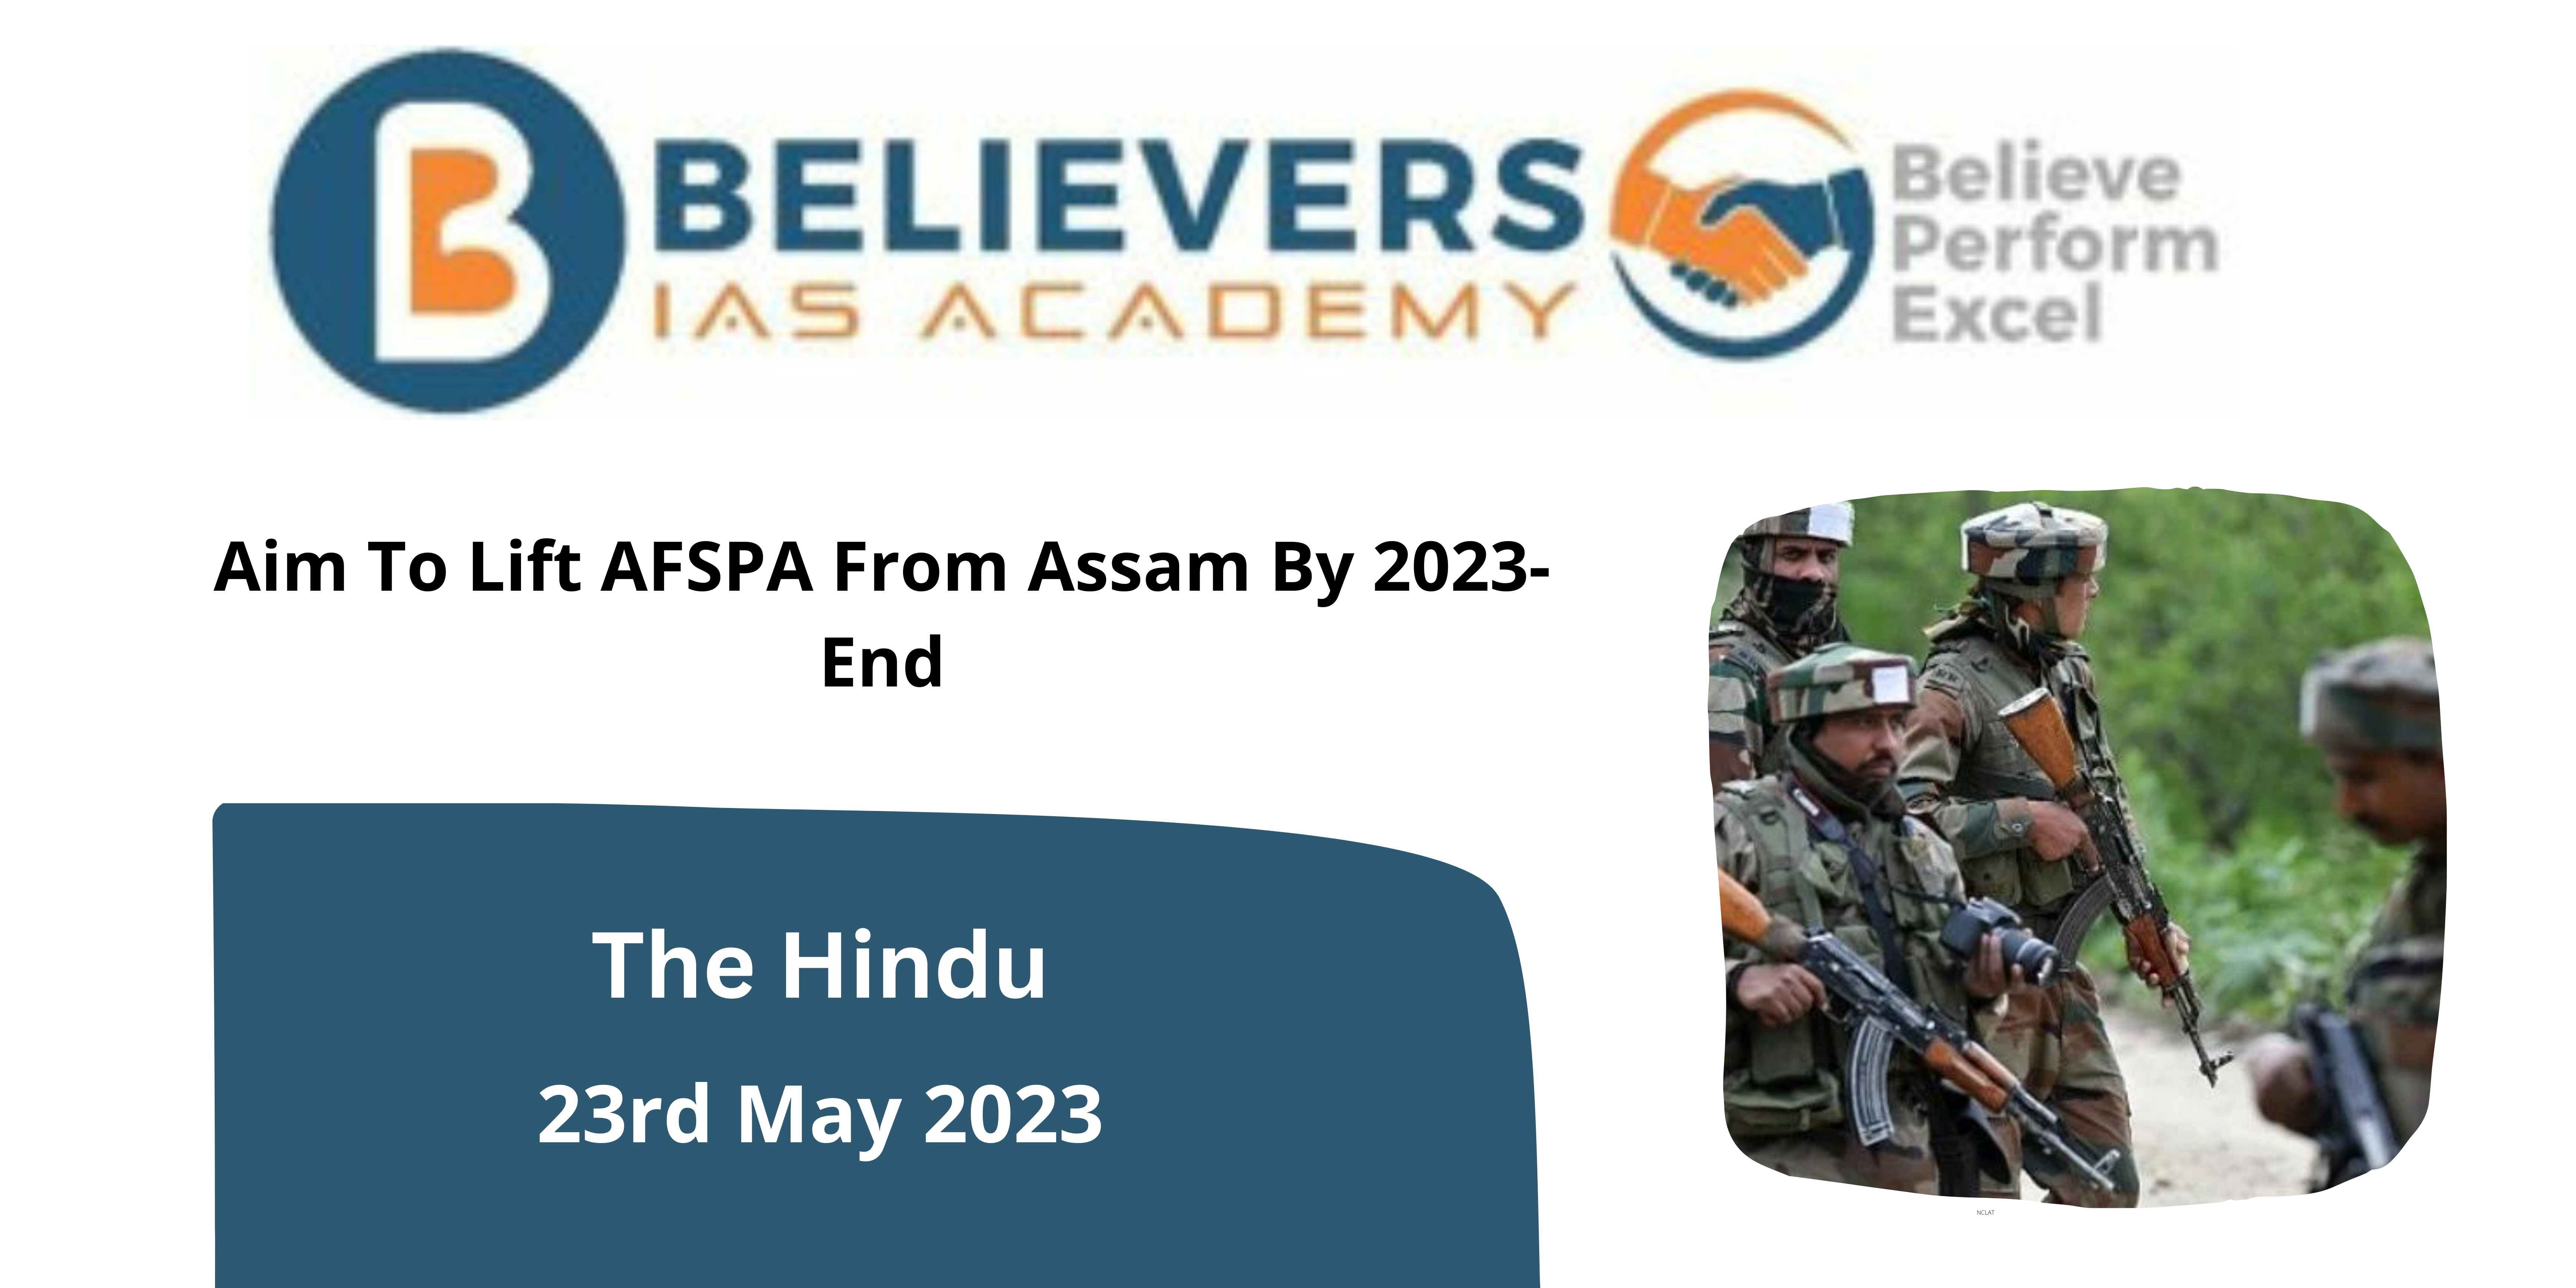 Aim To Lift AFSPA From Assam By 2023-End